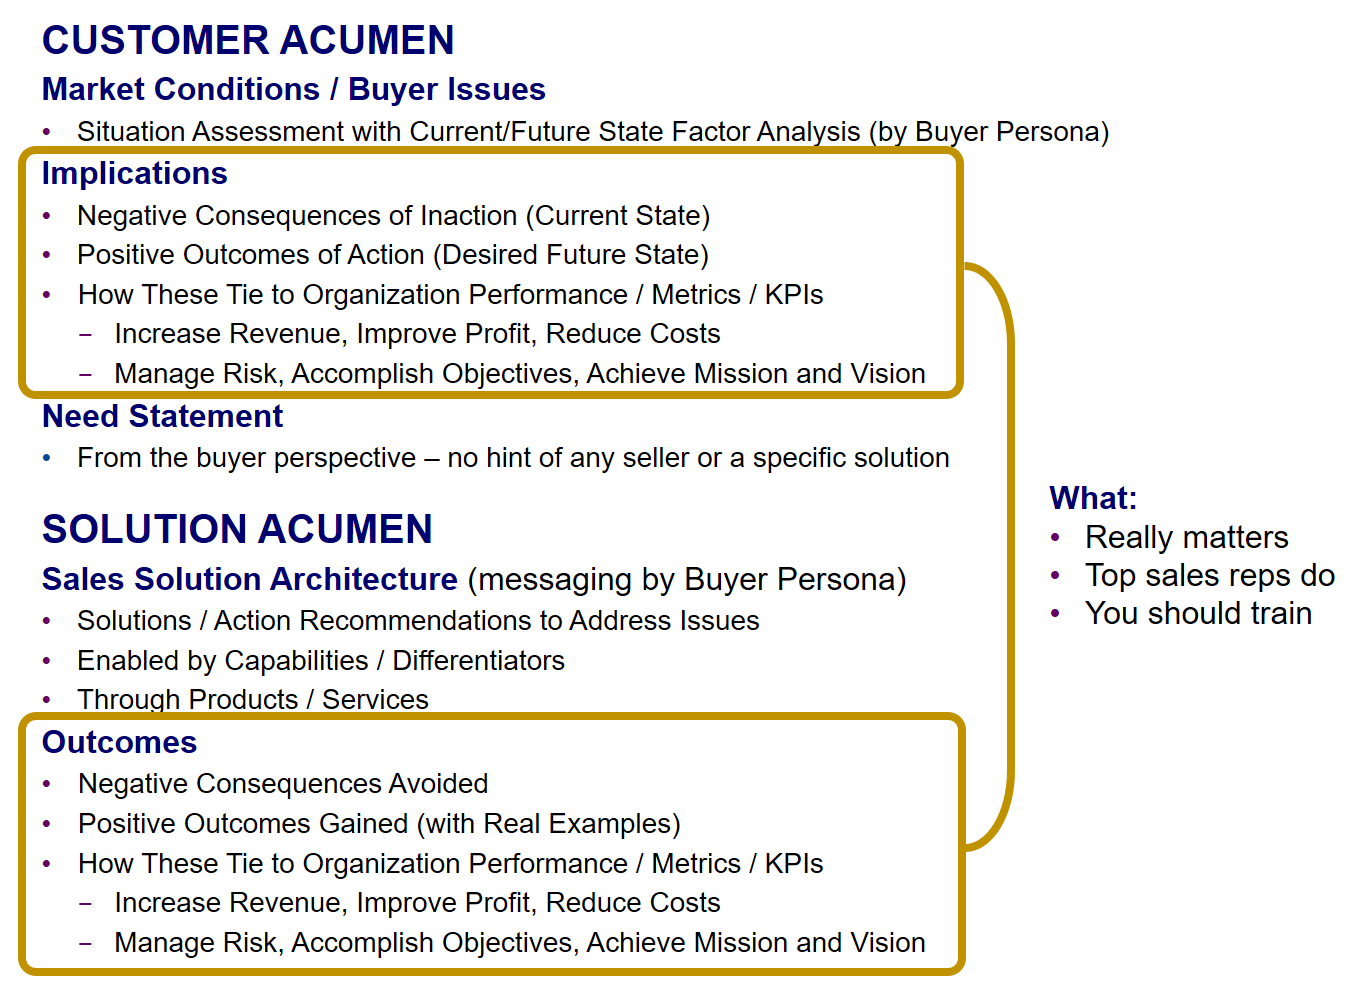 Customer Acumen meets Solution Acumen - What You Should Do